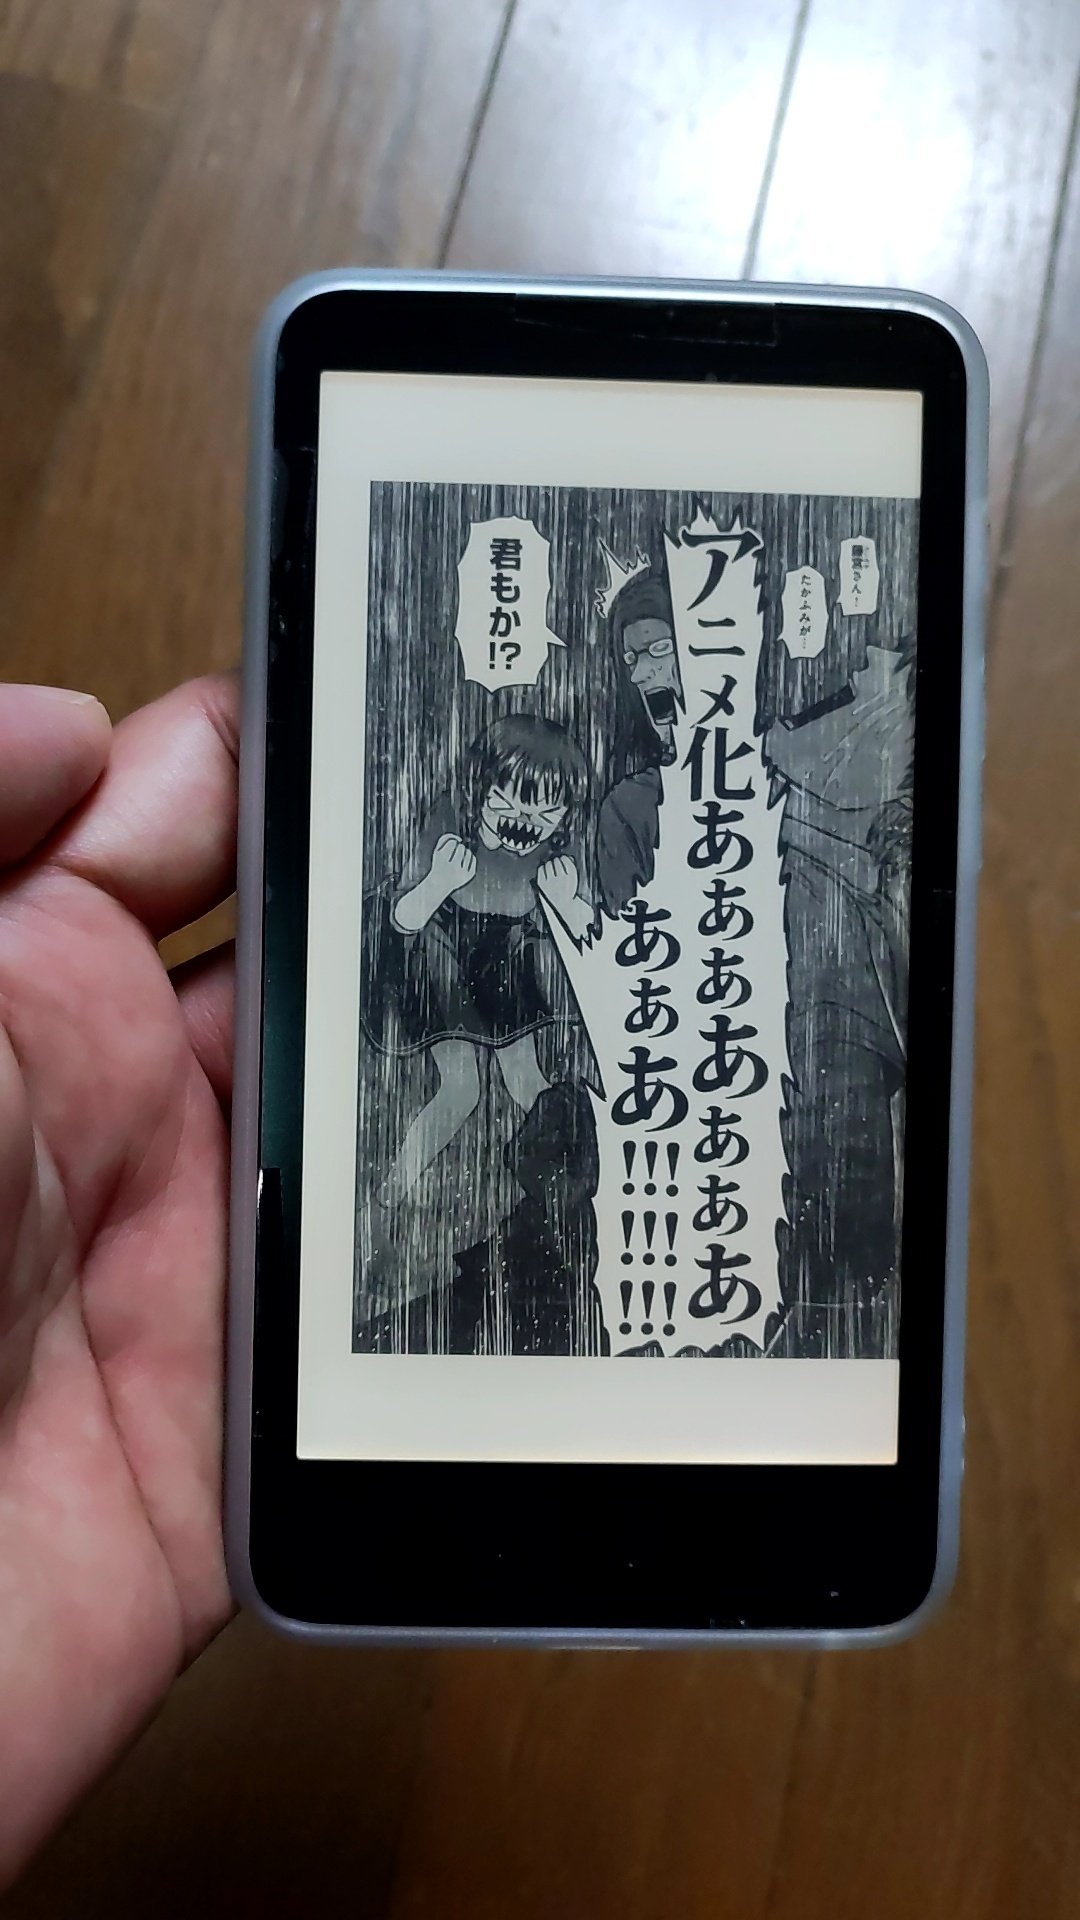 Inkpalm 5 Android 電子書籍リーダー - 電子ブックリーダー